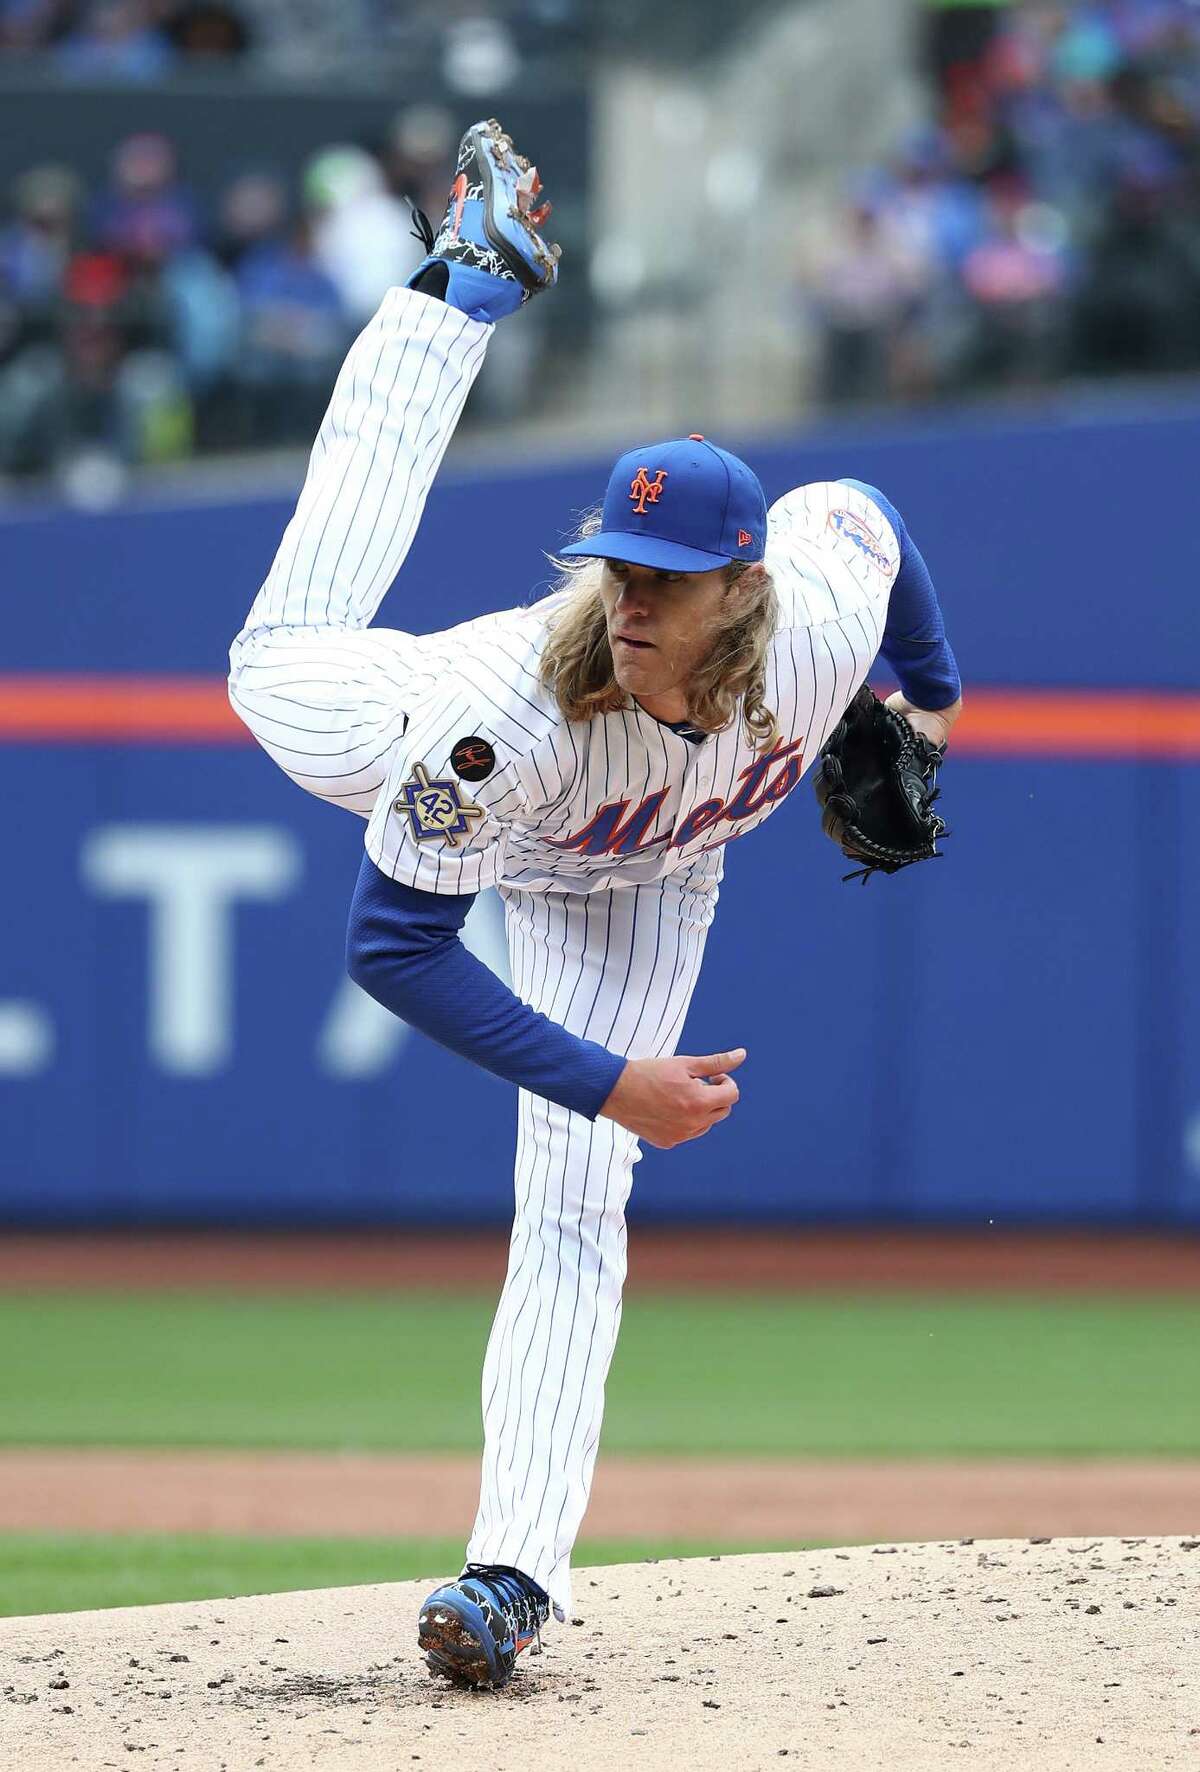 NEW YORK, NY - APRIL 15: Noah Syndergaard #34 of the New York Mets pitches against the Milwaukee Brewers during their game at Citi Field on April 15, 2018 in New York City. All players are wearing #42 in honor of Jackie Robinson Day. (Photo by Al Bello/Getty Images)